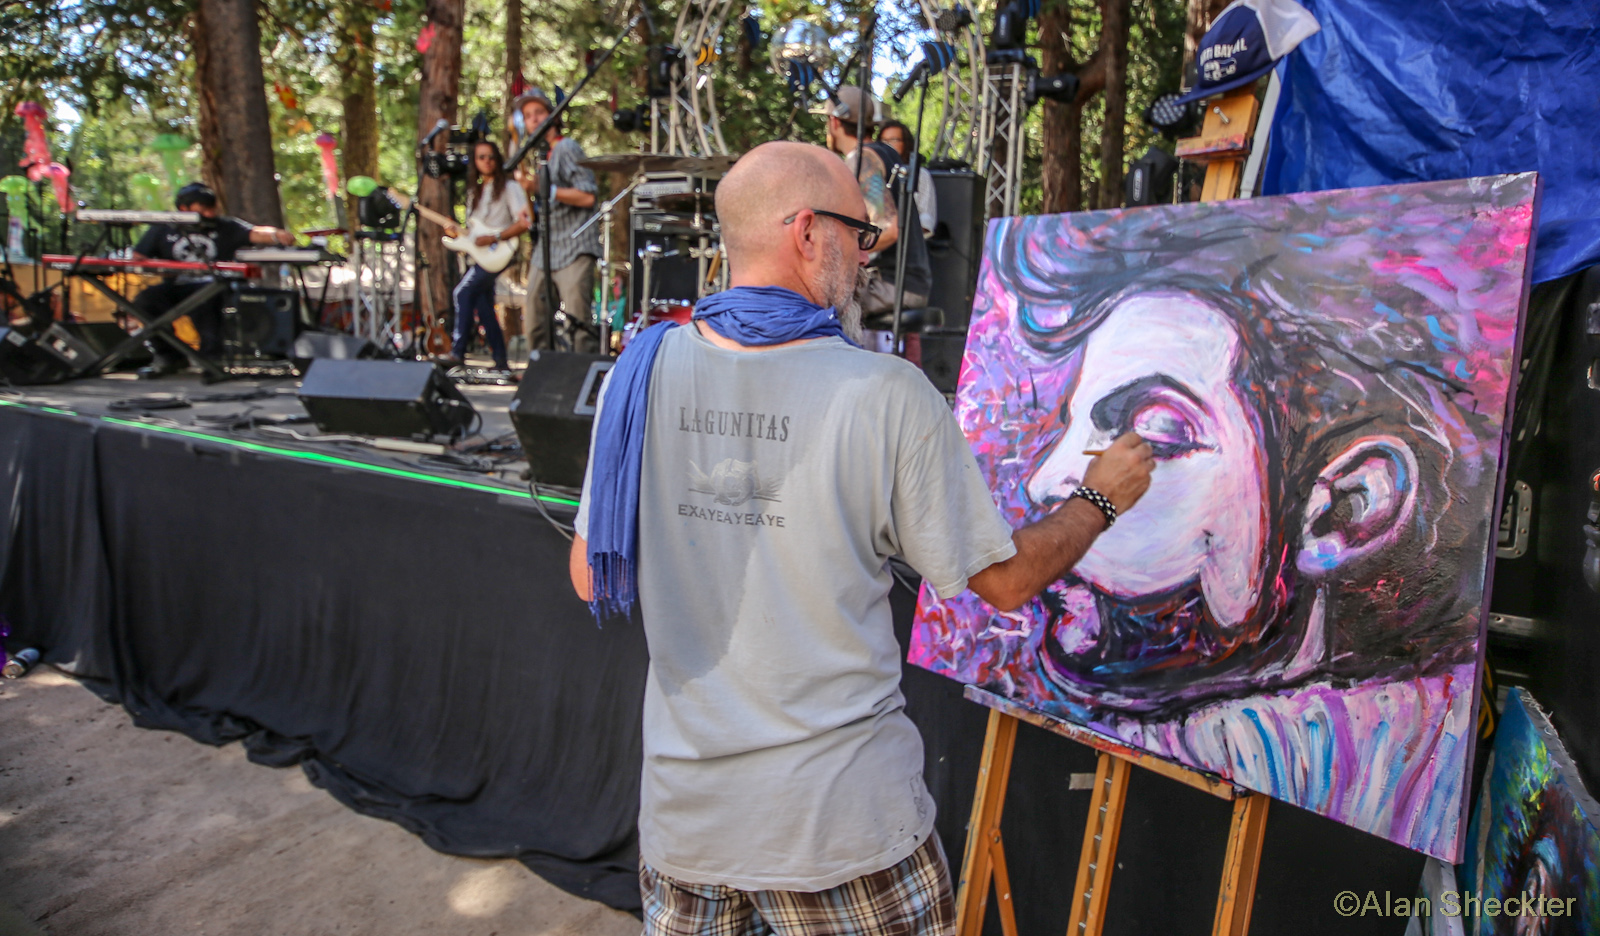 Live painting during Yak Attacks set